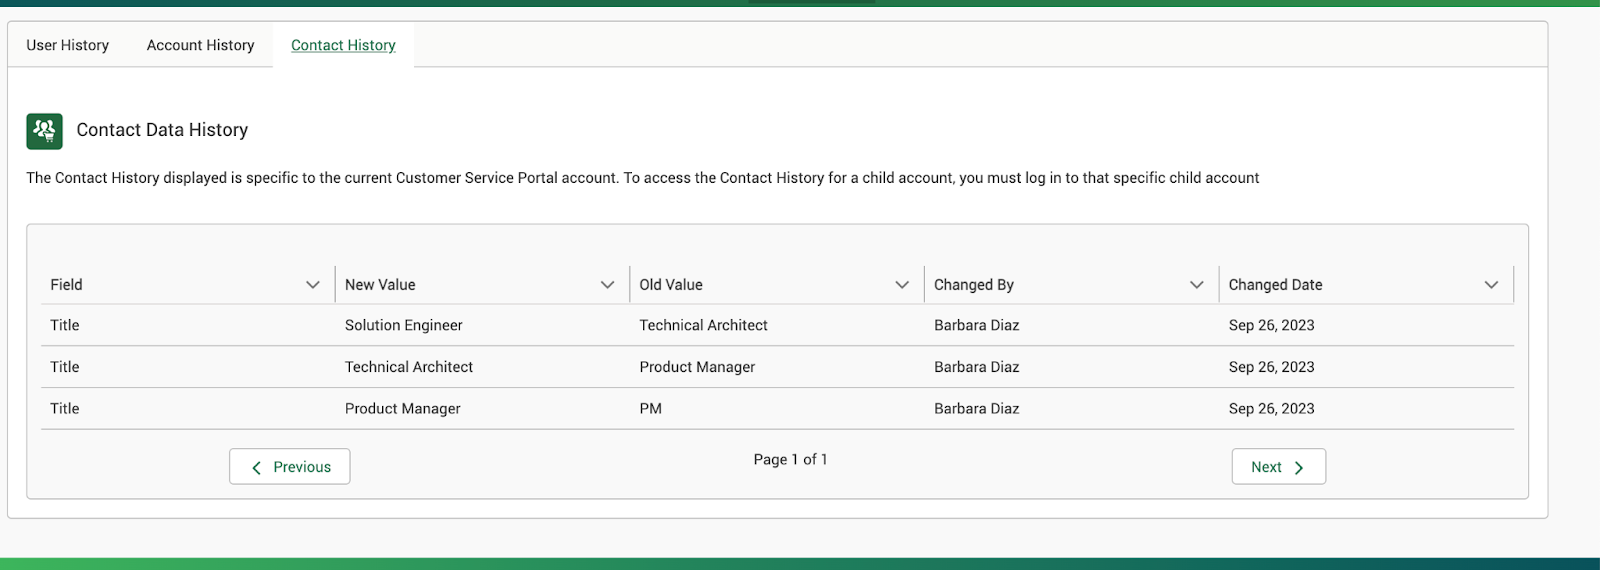 Accessing Contact Data History in teh Client Service Portal